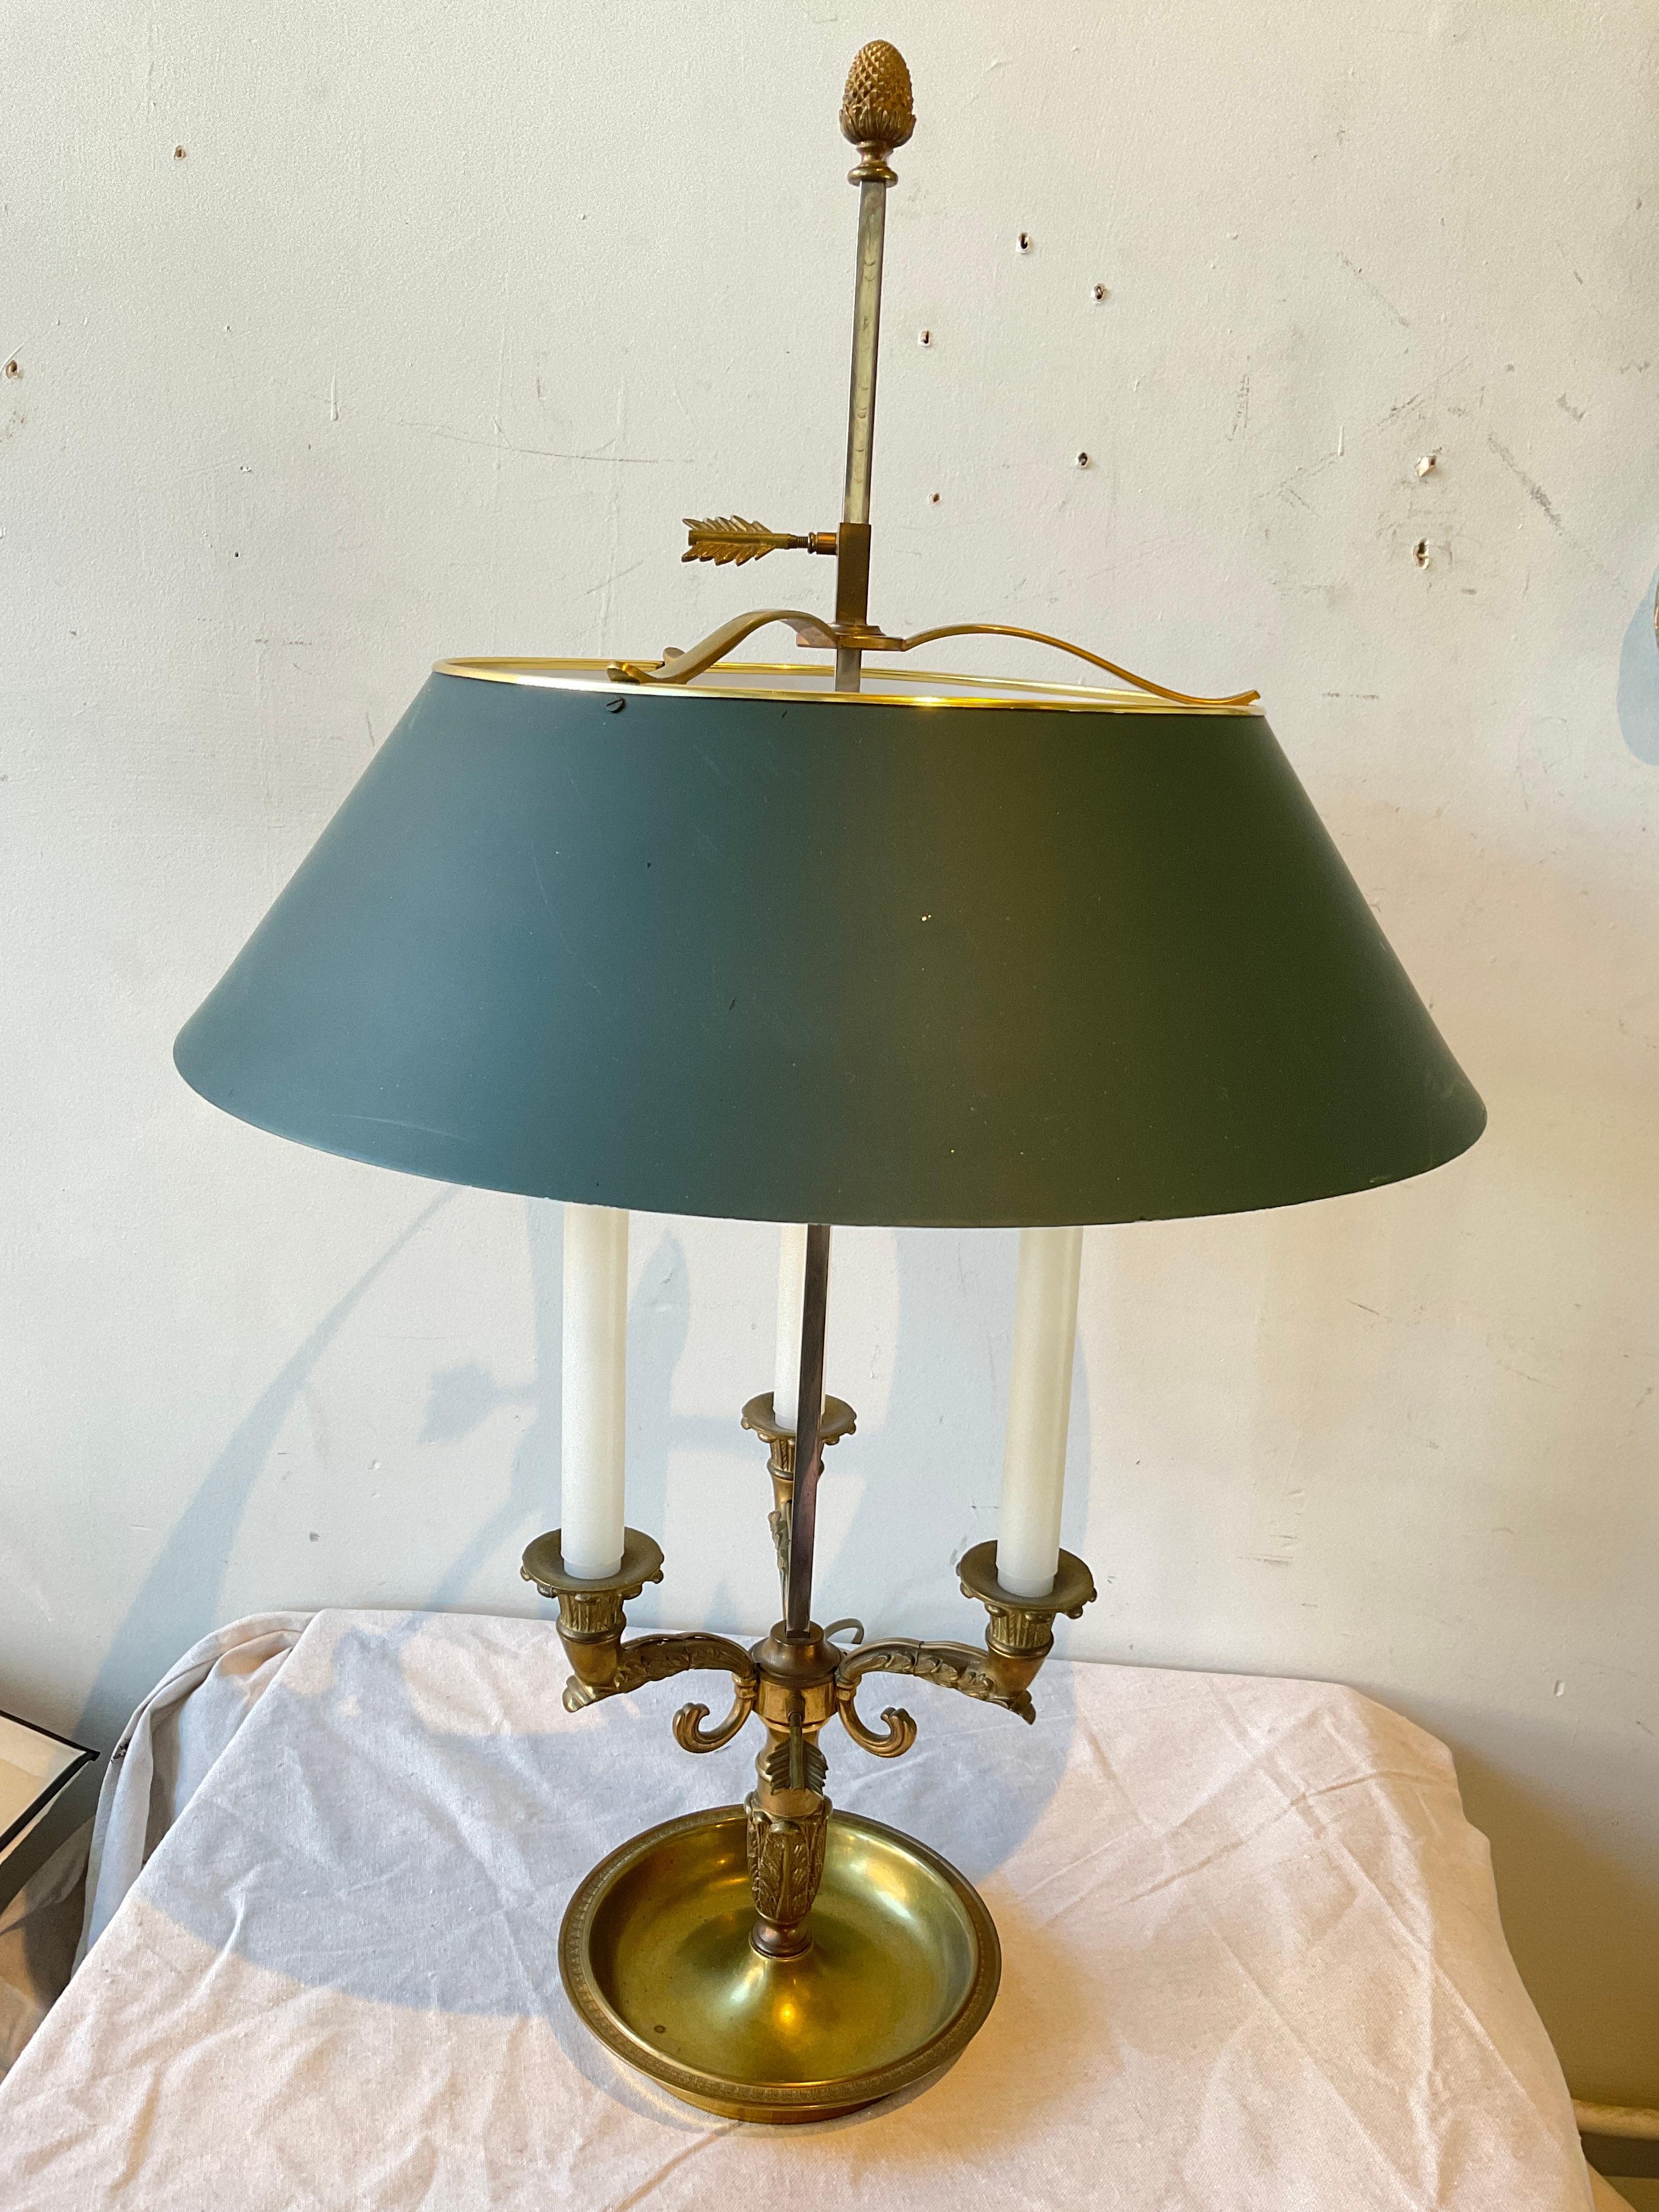 Brass Bouillotte lamp with green toll shade . Solid brass.
Has original wiring, needs rewiring.